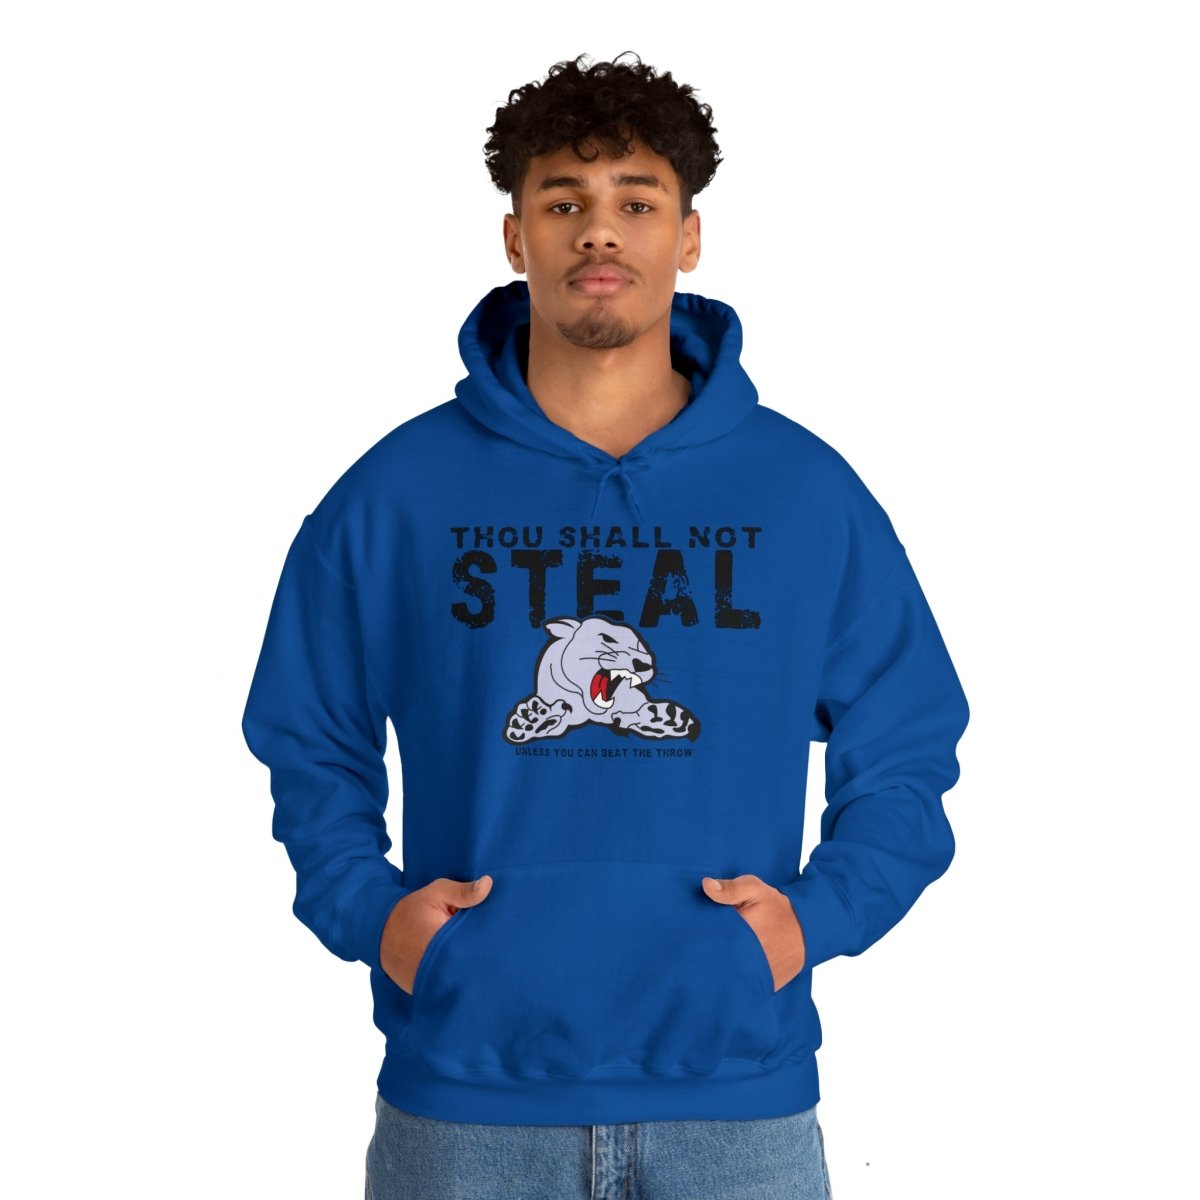 Cougar Shall Not Steal Hooded Sweatshirt